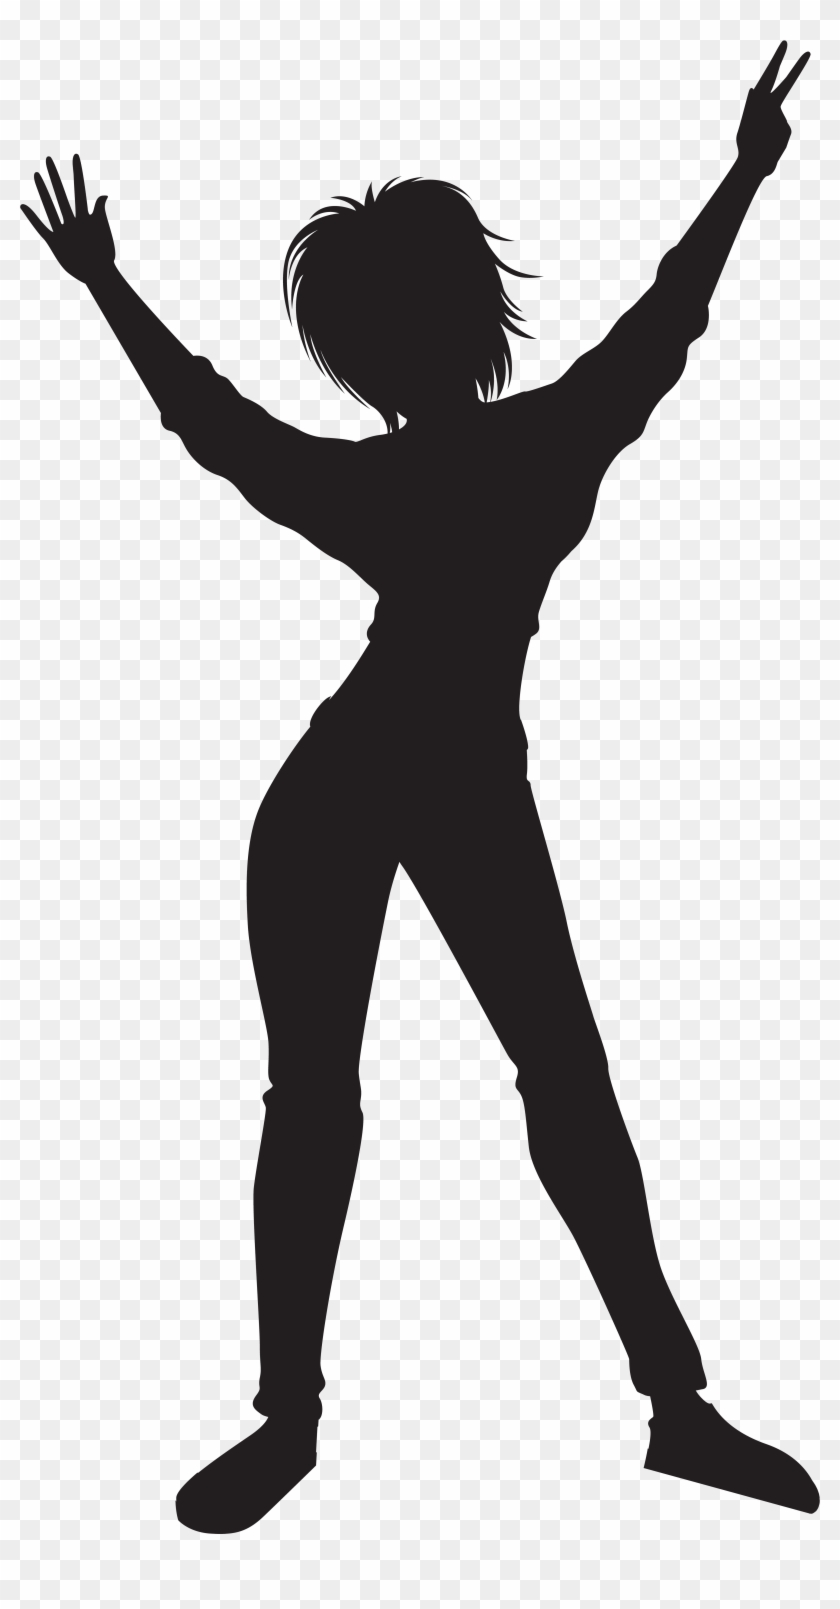 Dancing Girl Silhouette Png Clip Art Image - Transparent Silhouette Girl Dance Png #145673